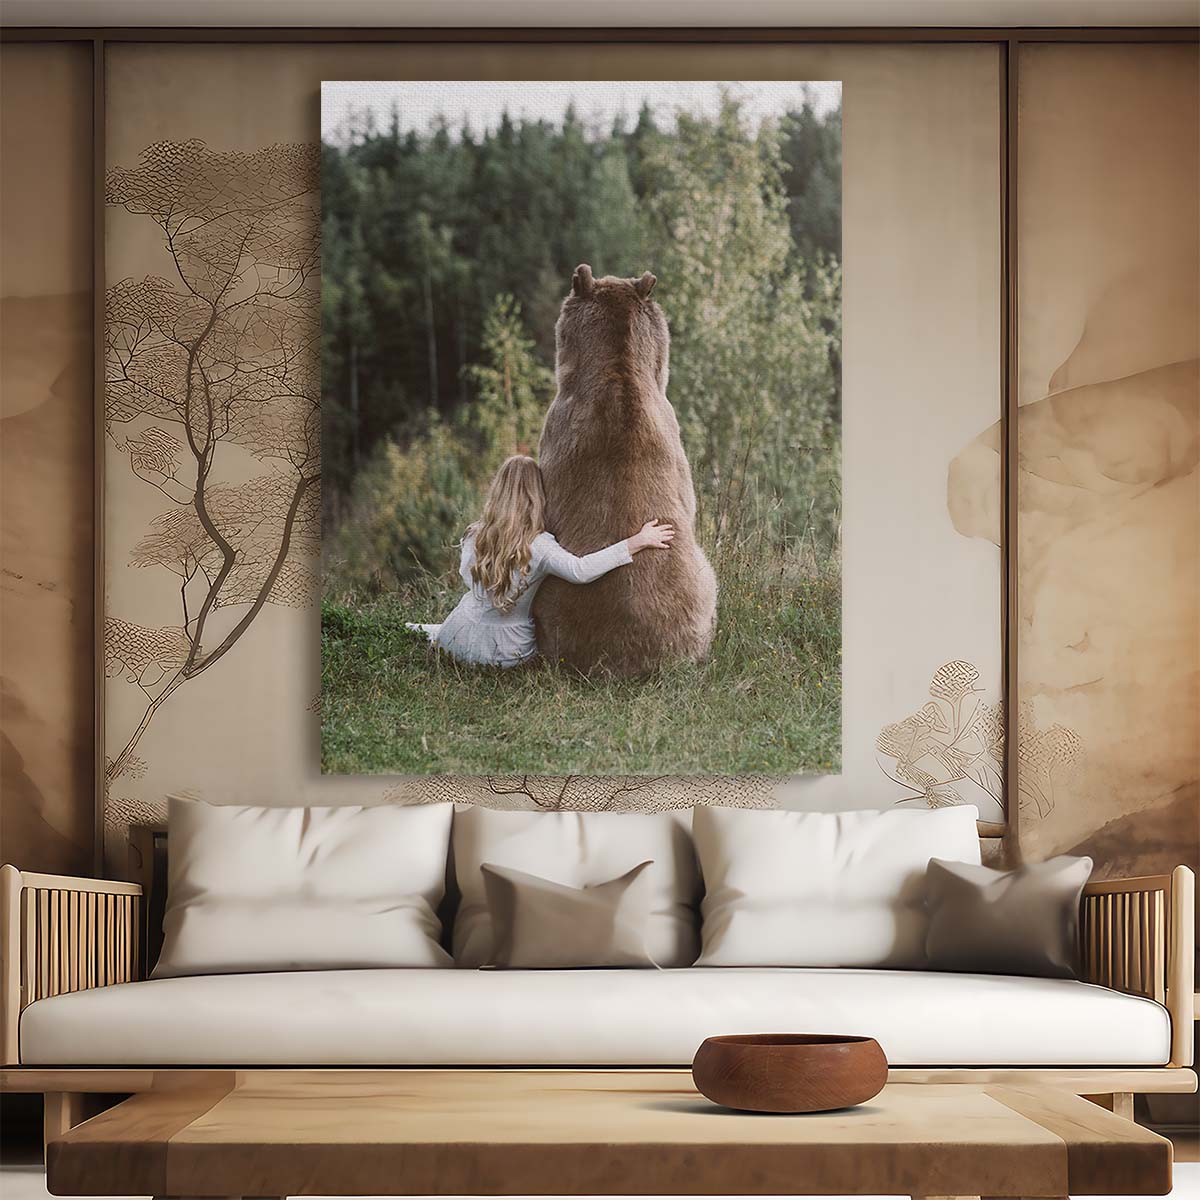 Romantic Fantasy Photography Child's Tender Embrace with Guardian Brown Bear by Luxuriance Designs, made in USA